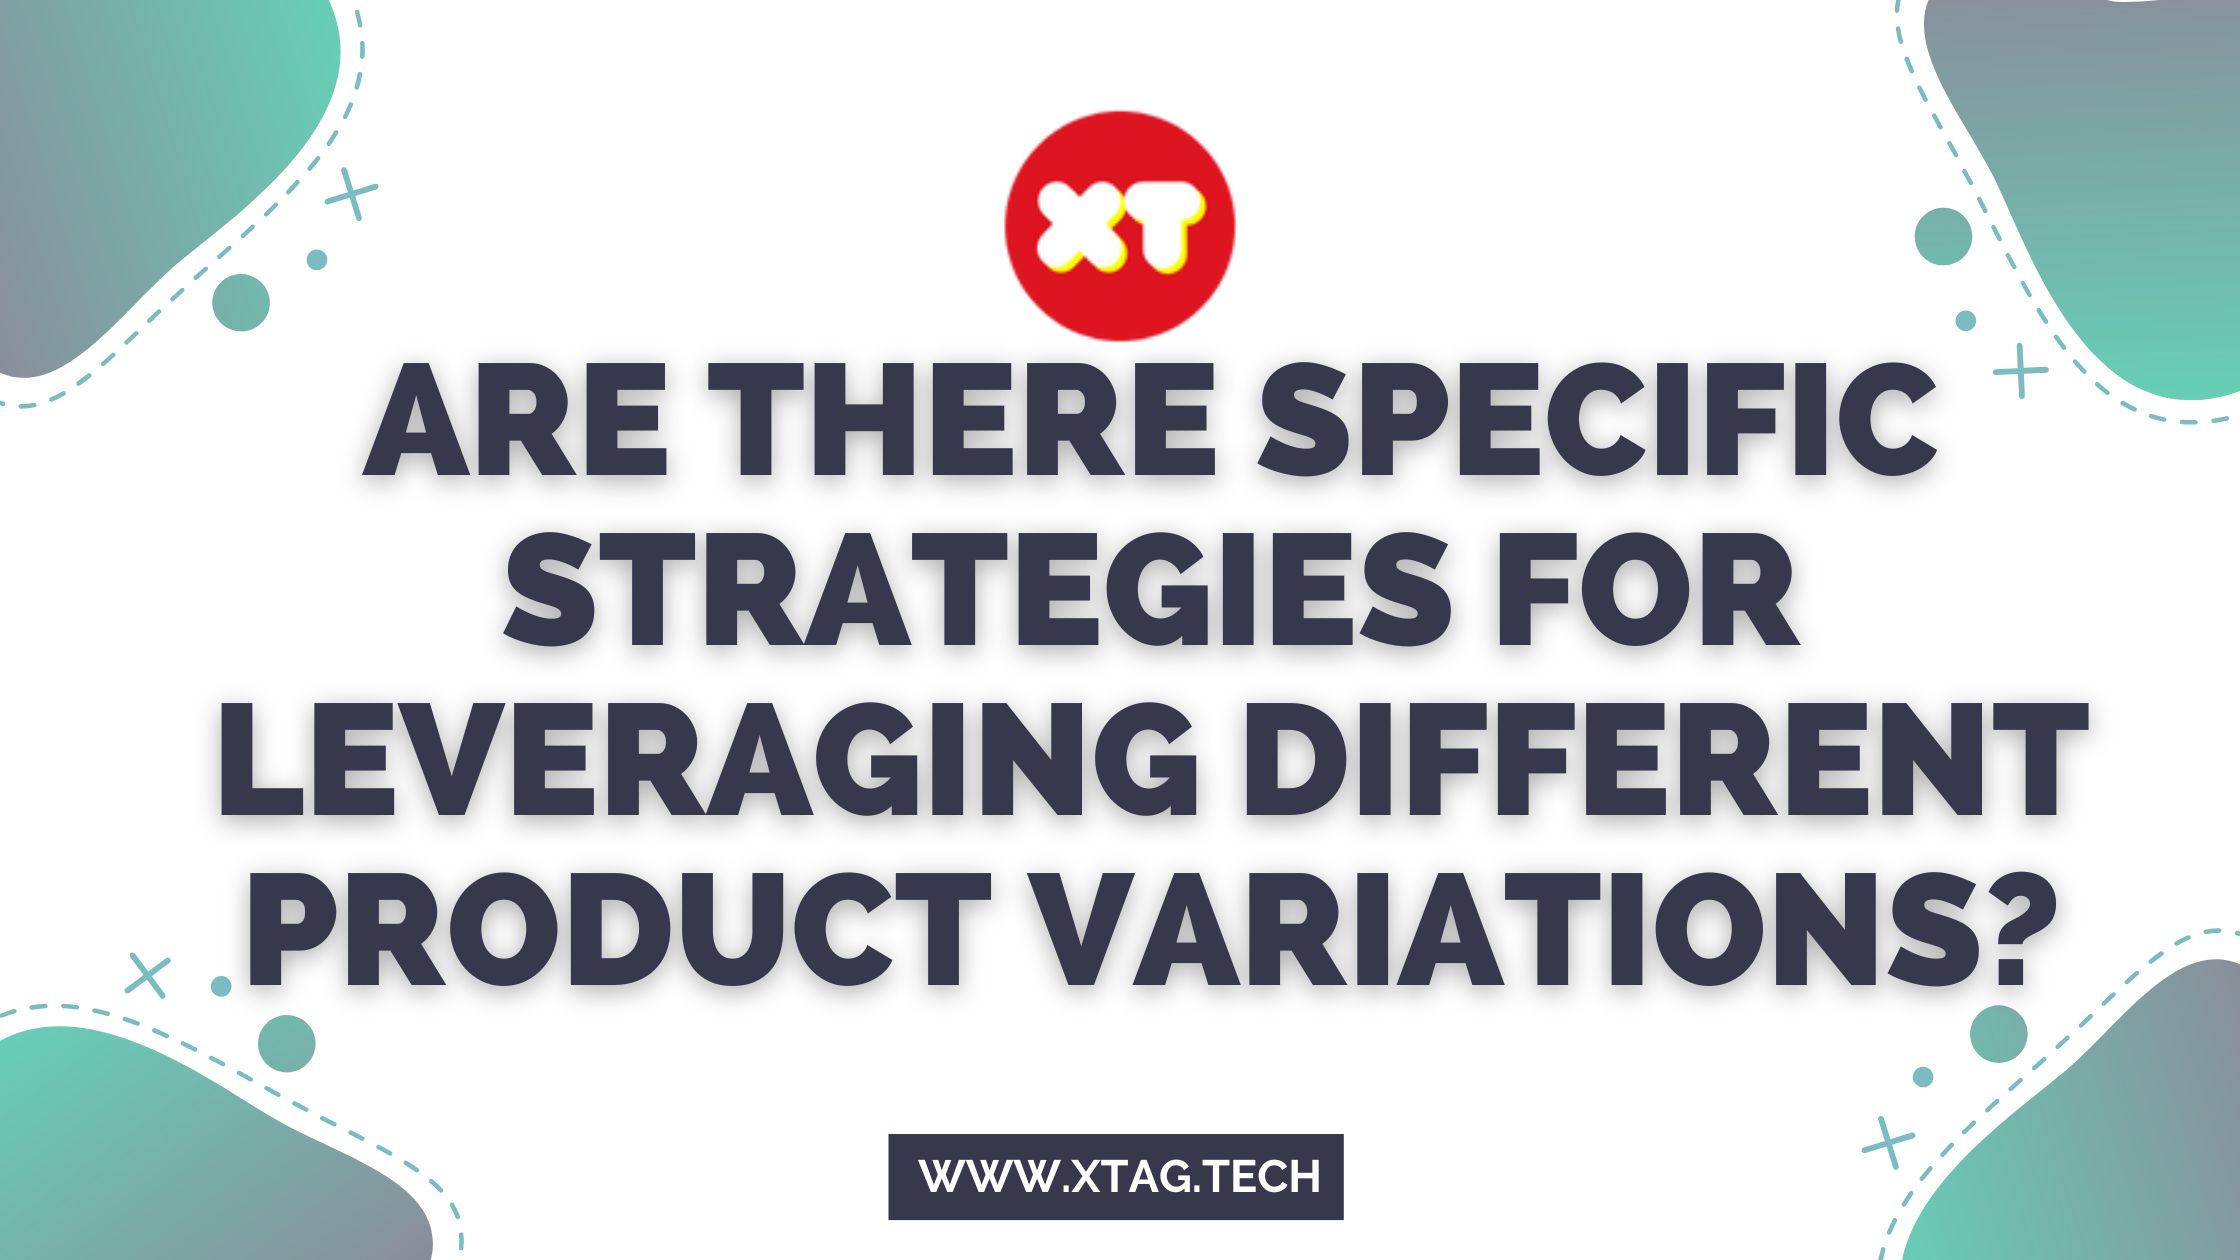 Are There Specific Strategies For Leveraging Different Product Variations?